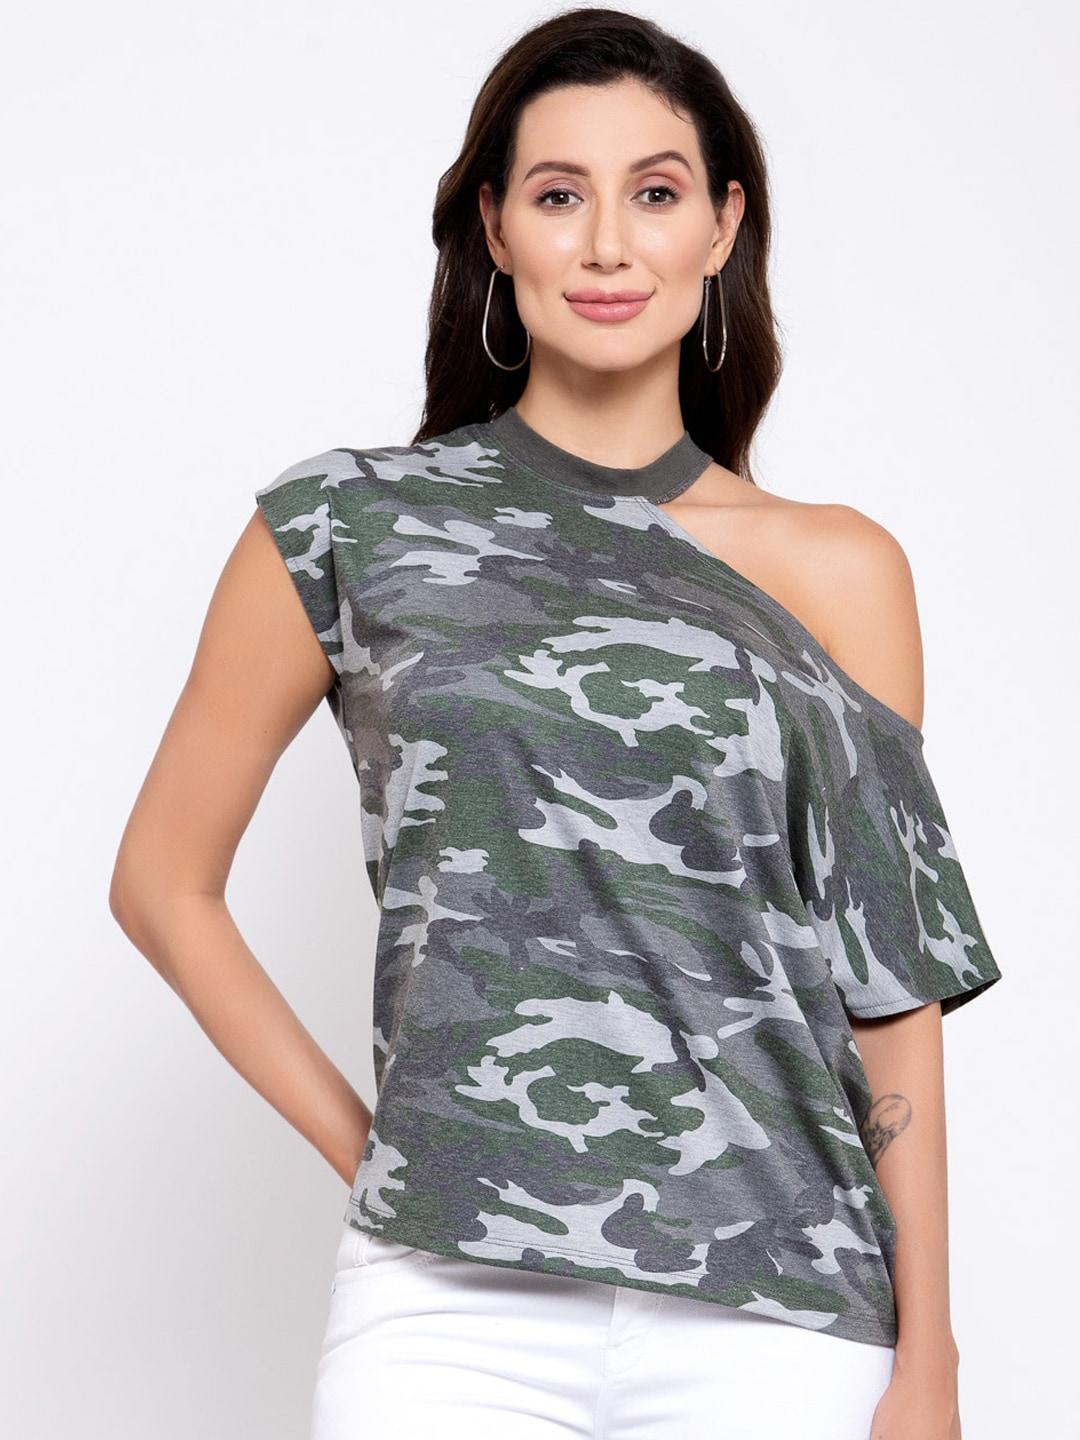 iki-chic-green-camouflage-print-cutout-shoulder-top